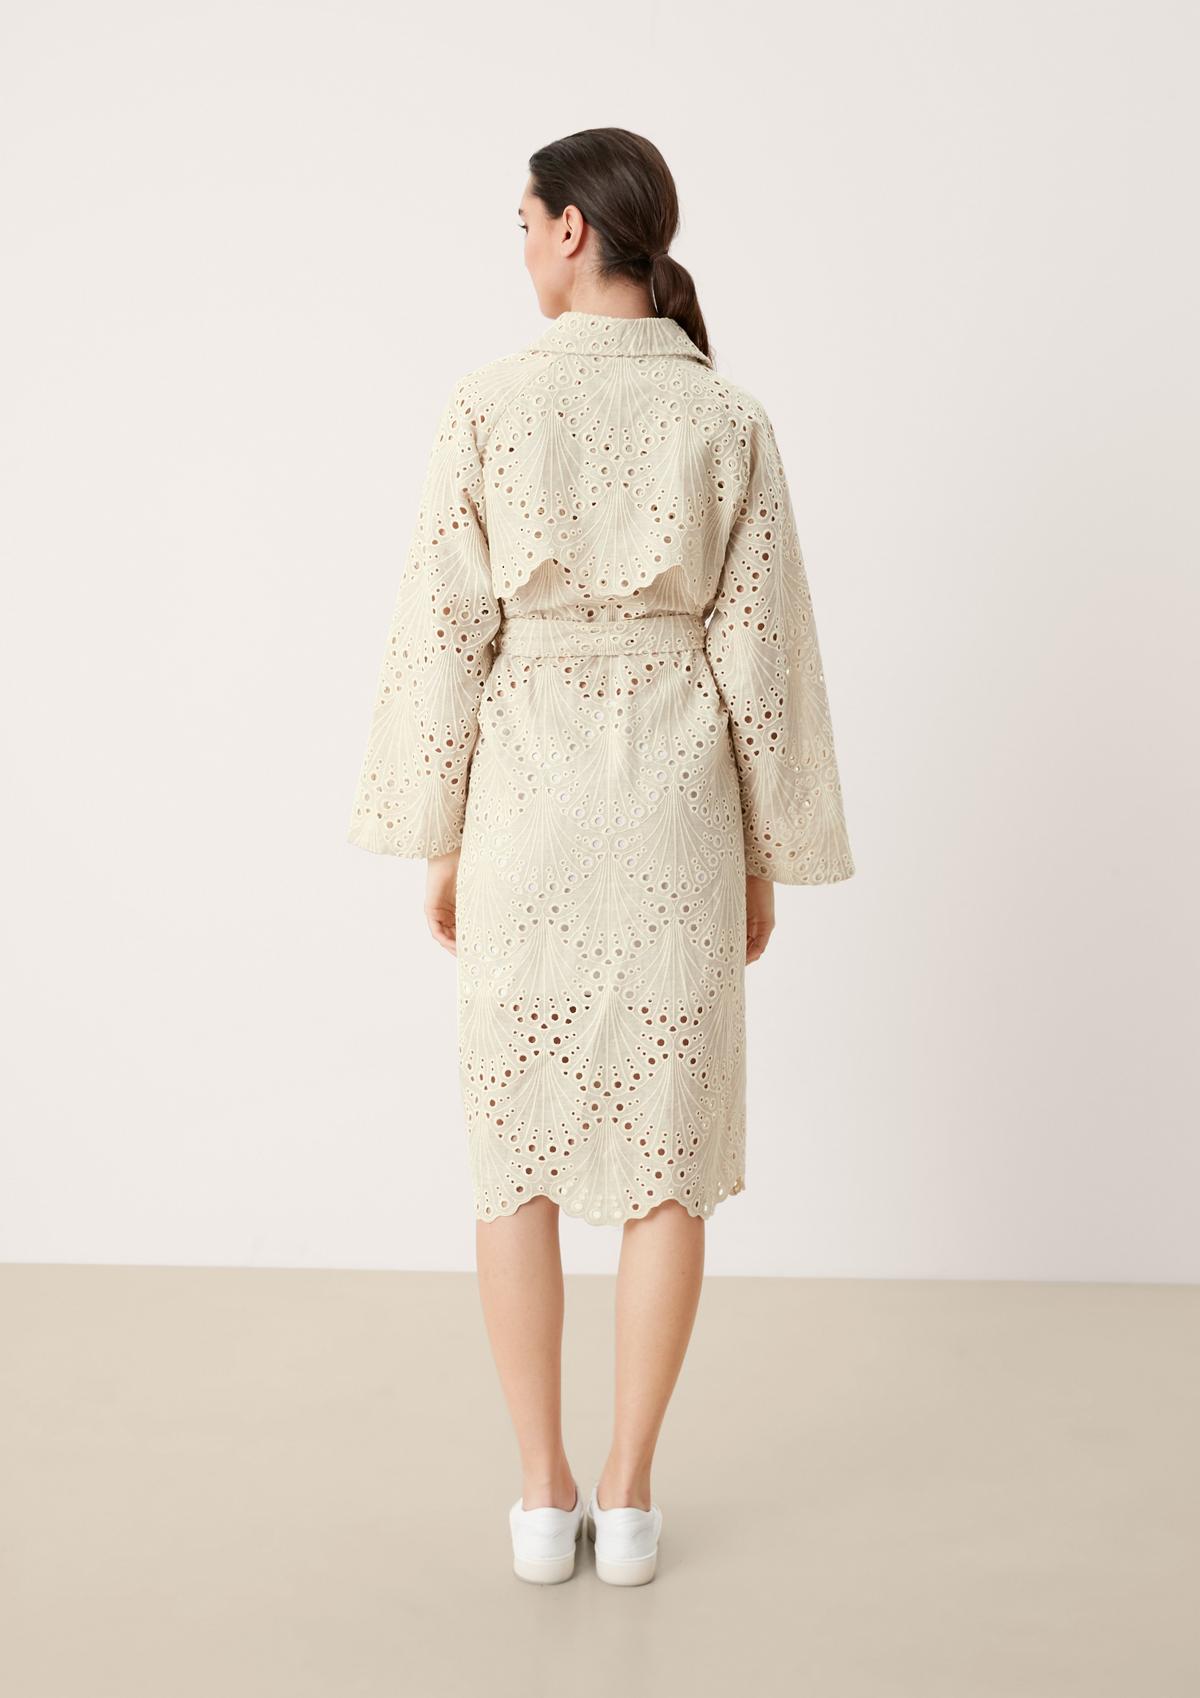 s.Oliver Jacket made of undyed lace